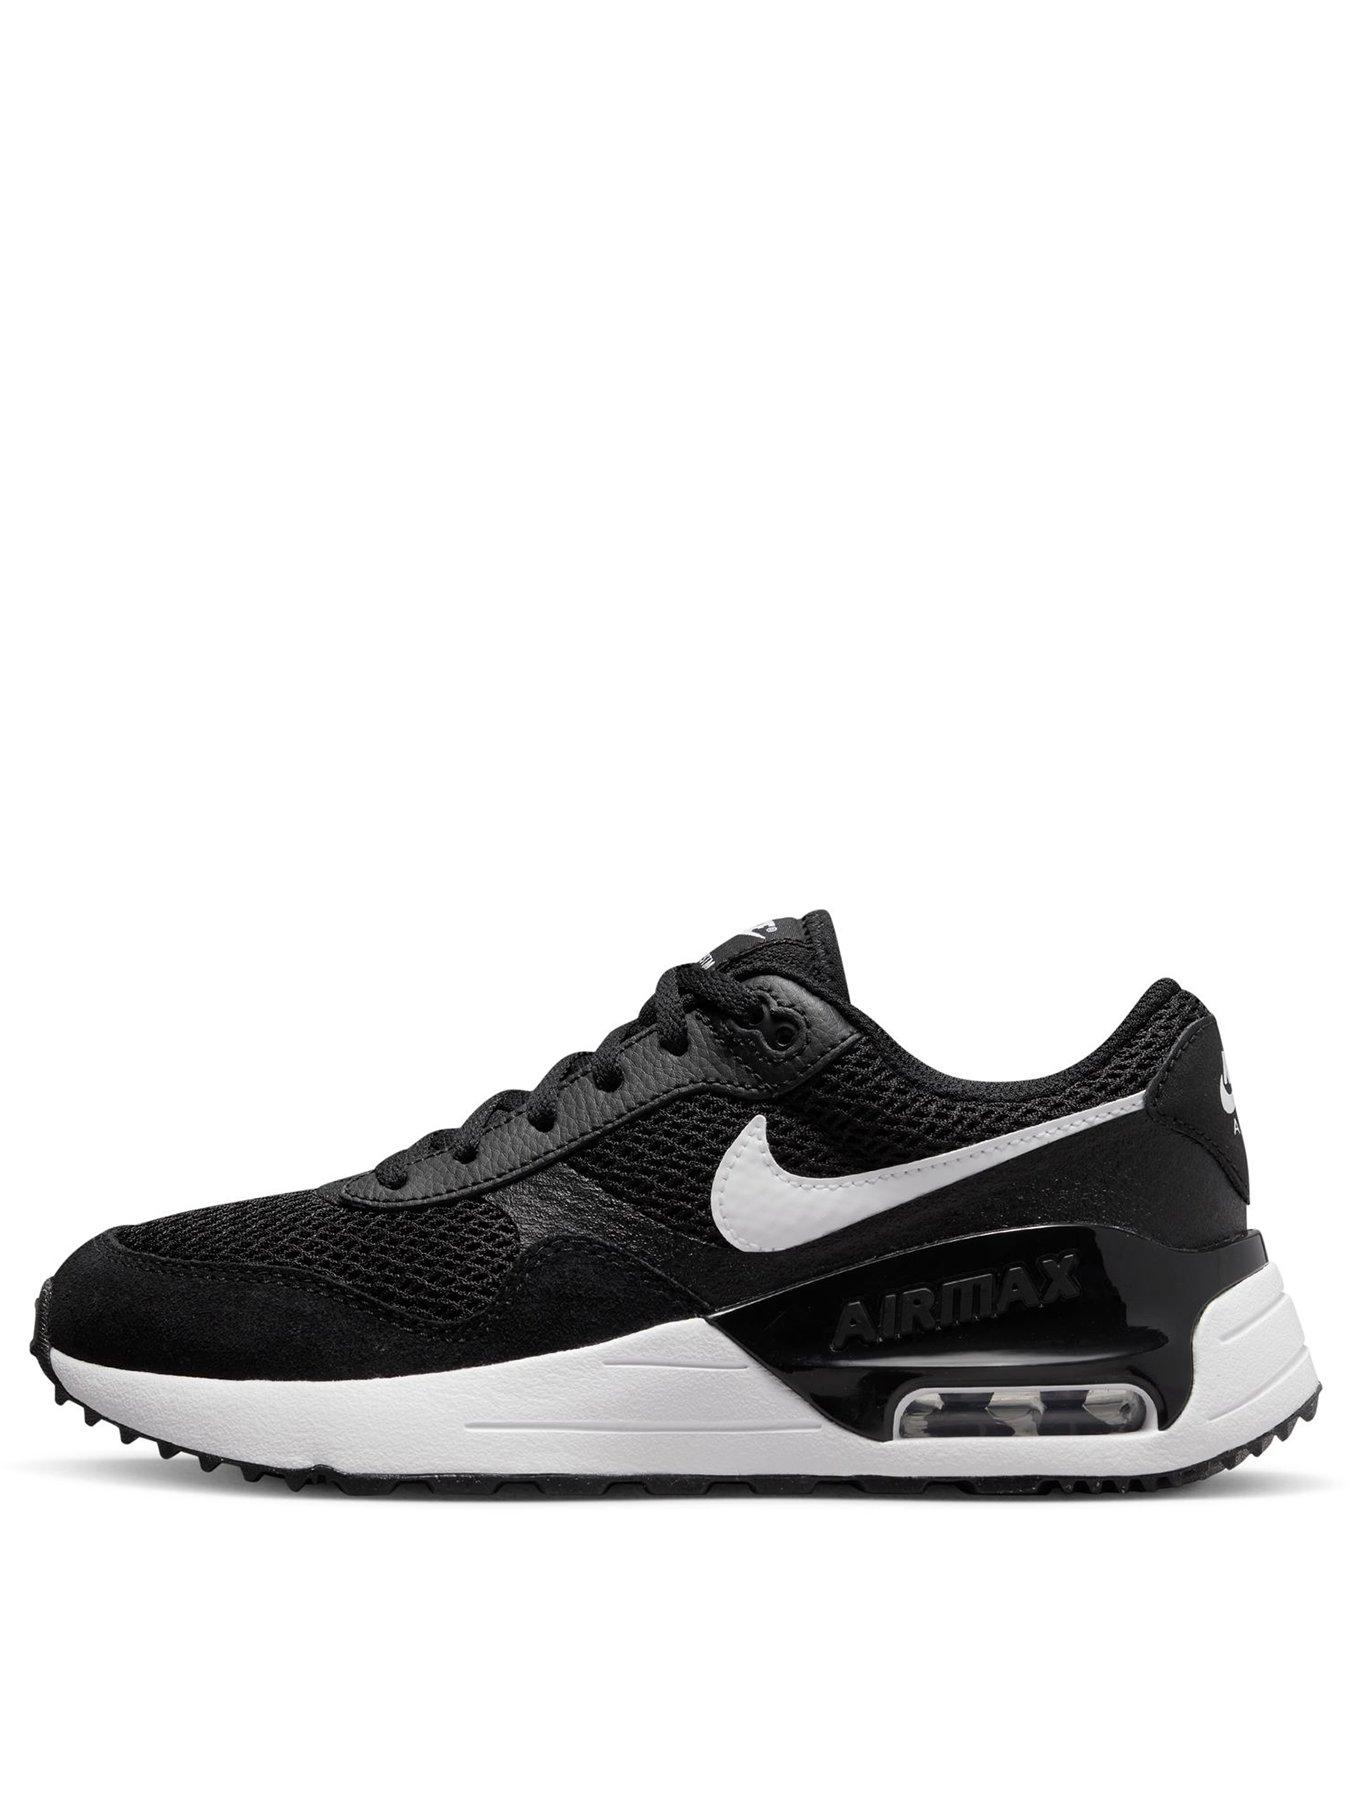 size 3 nike air max trainers